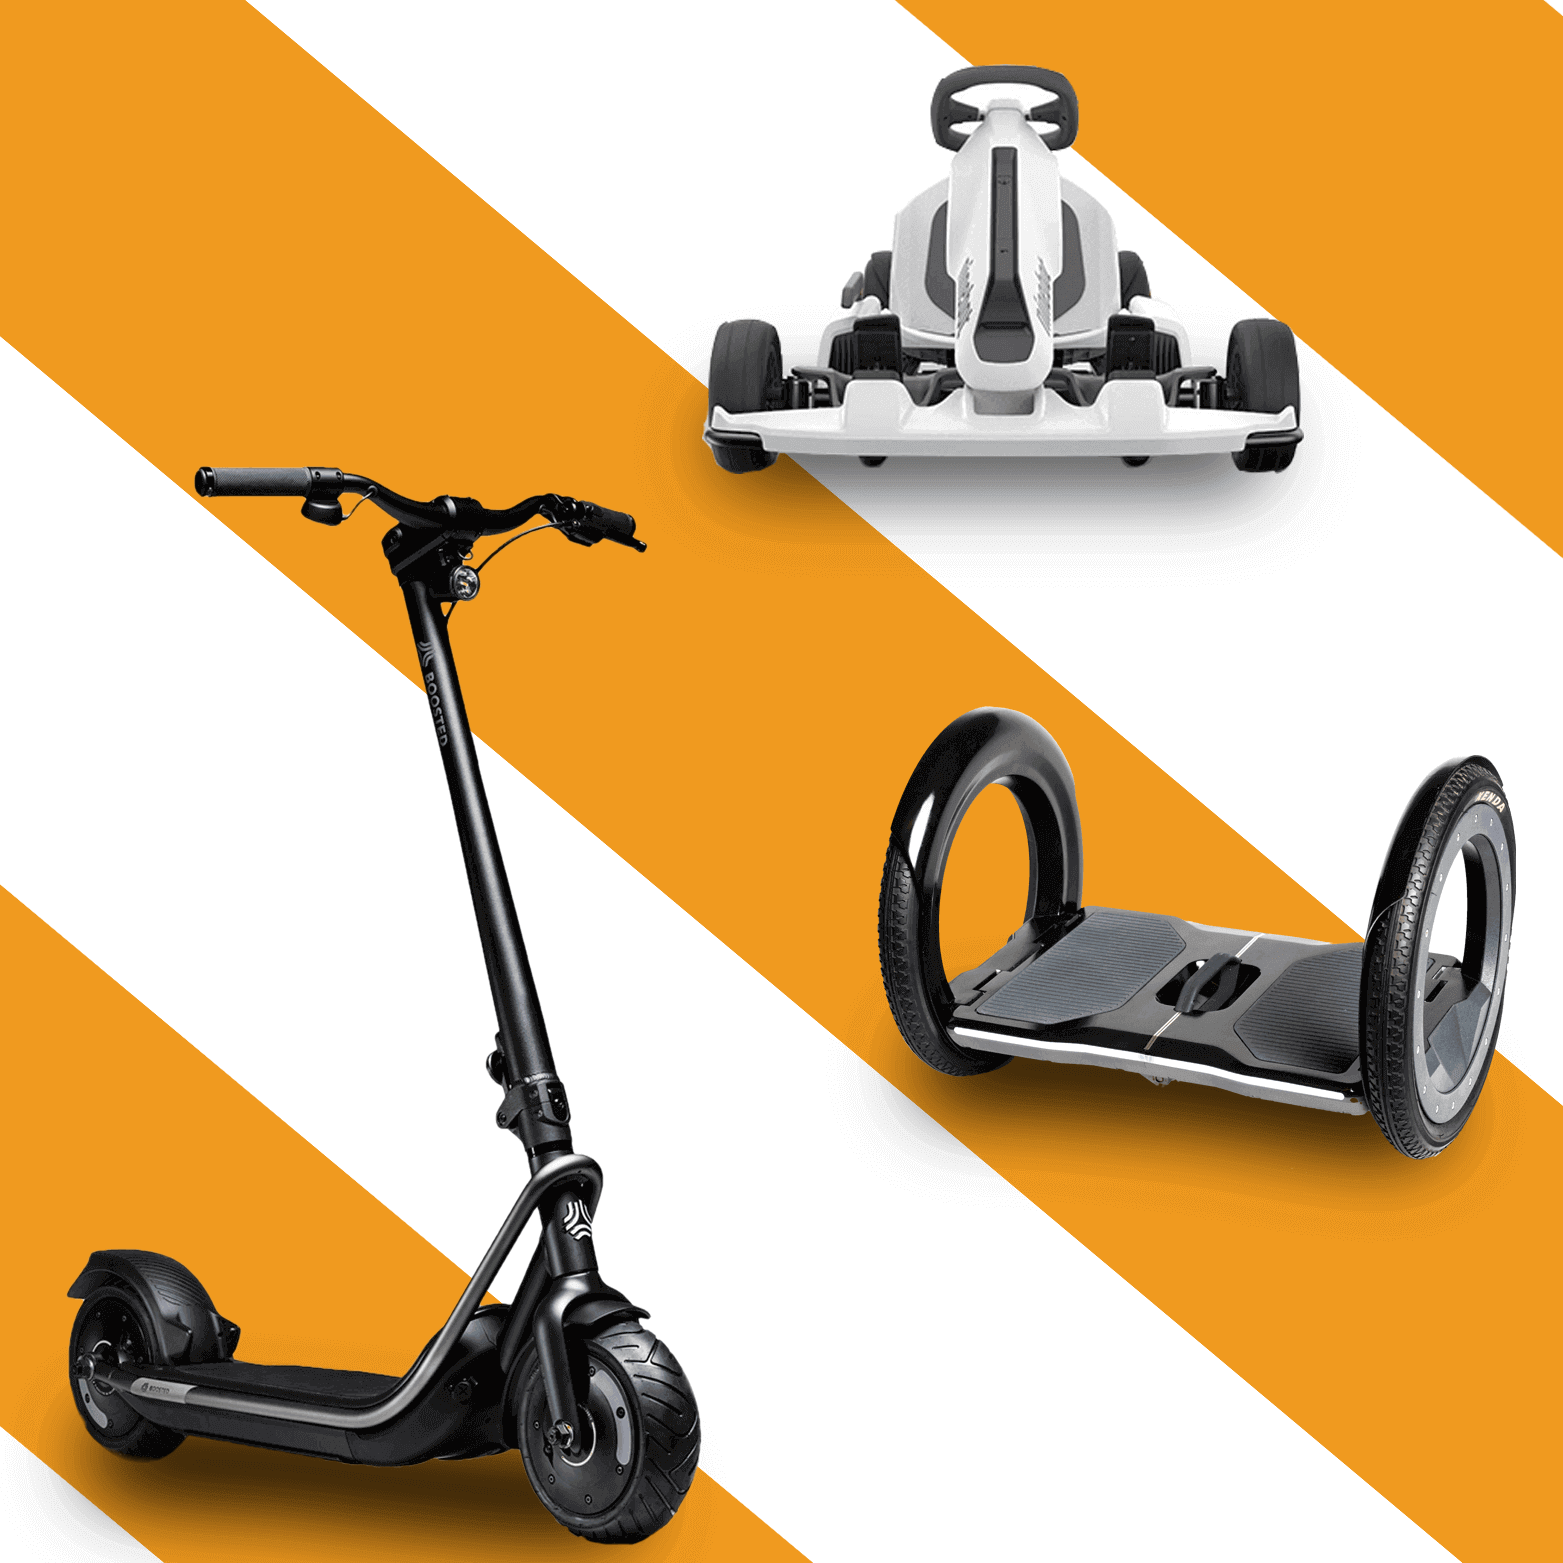 Best Electric Scooters